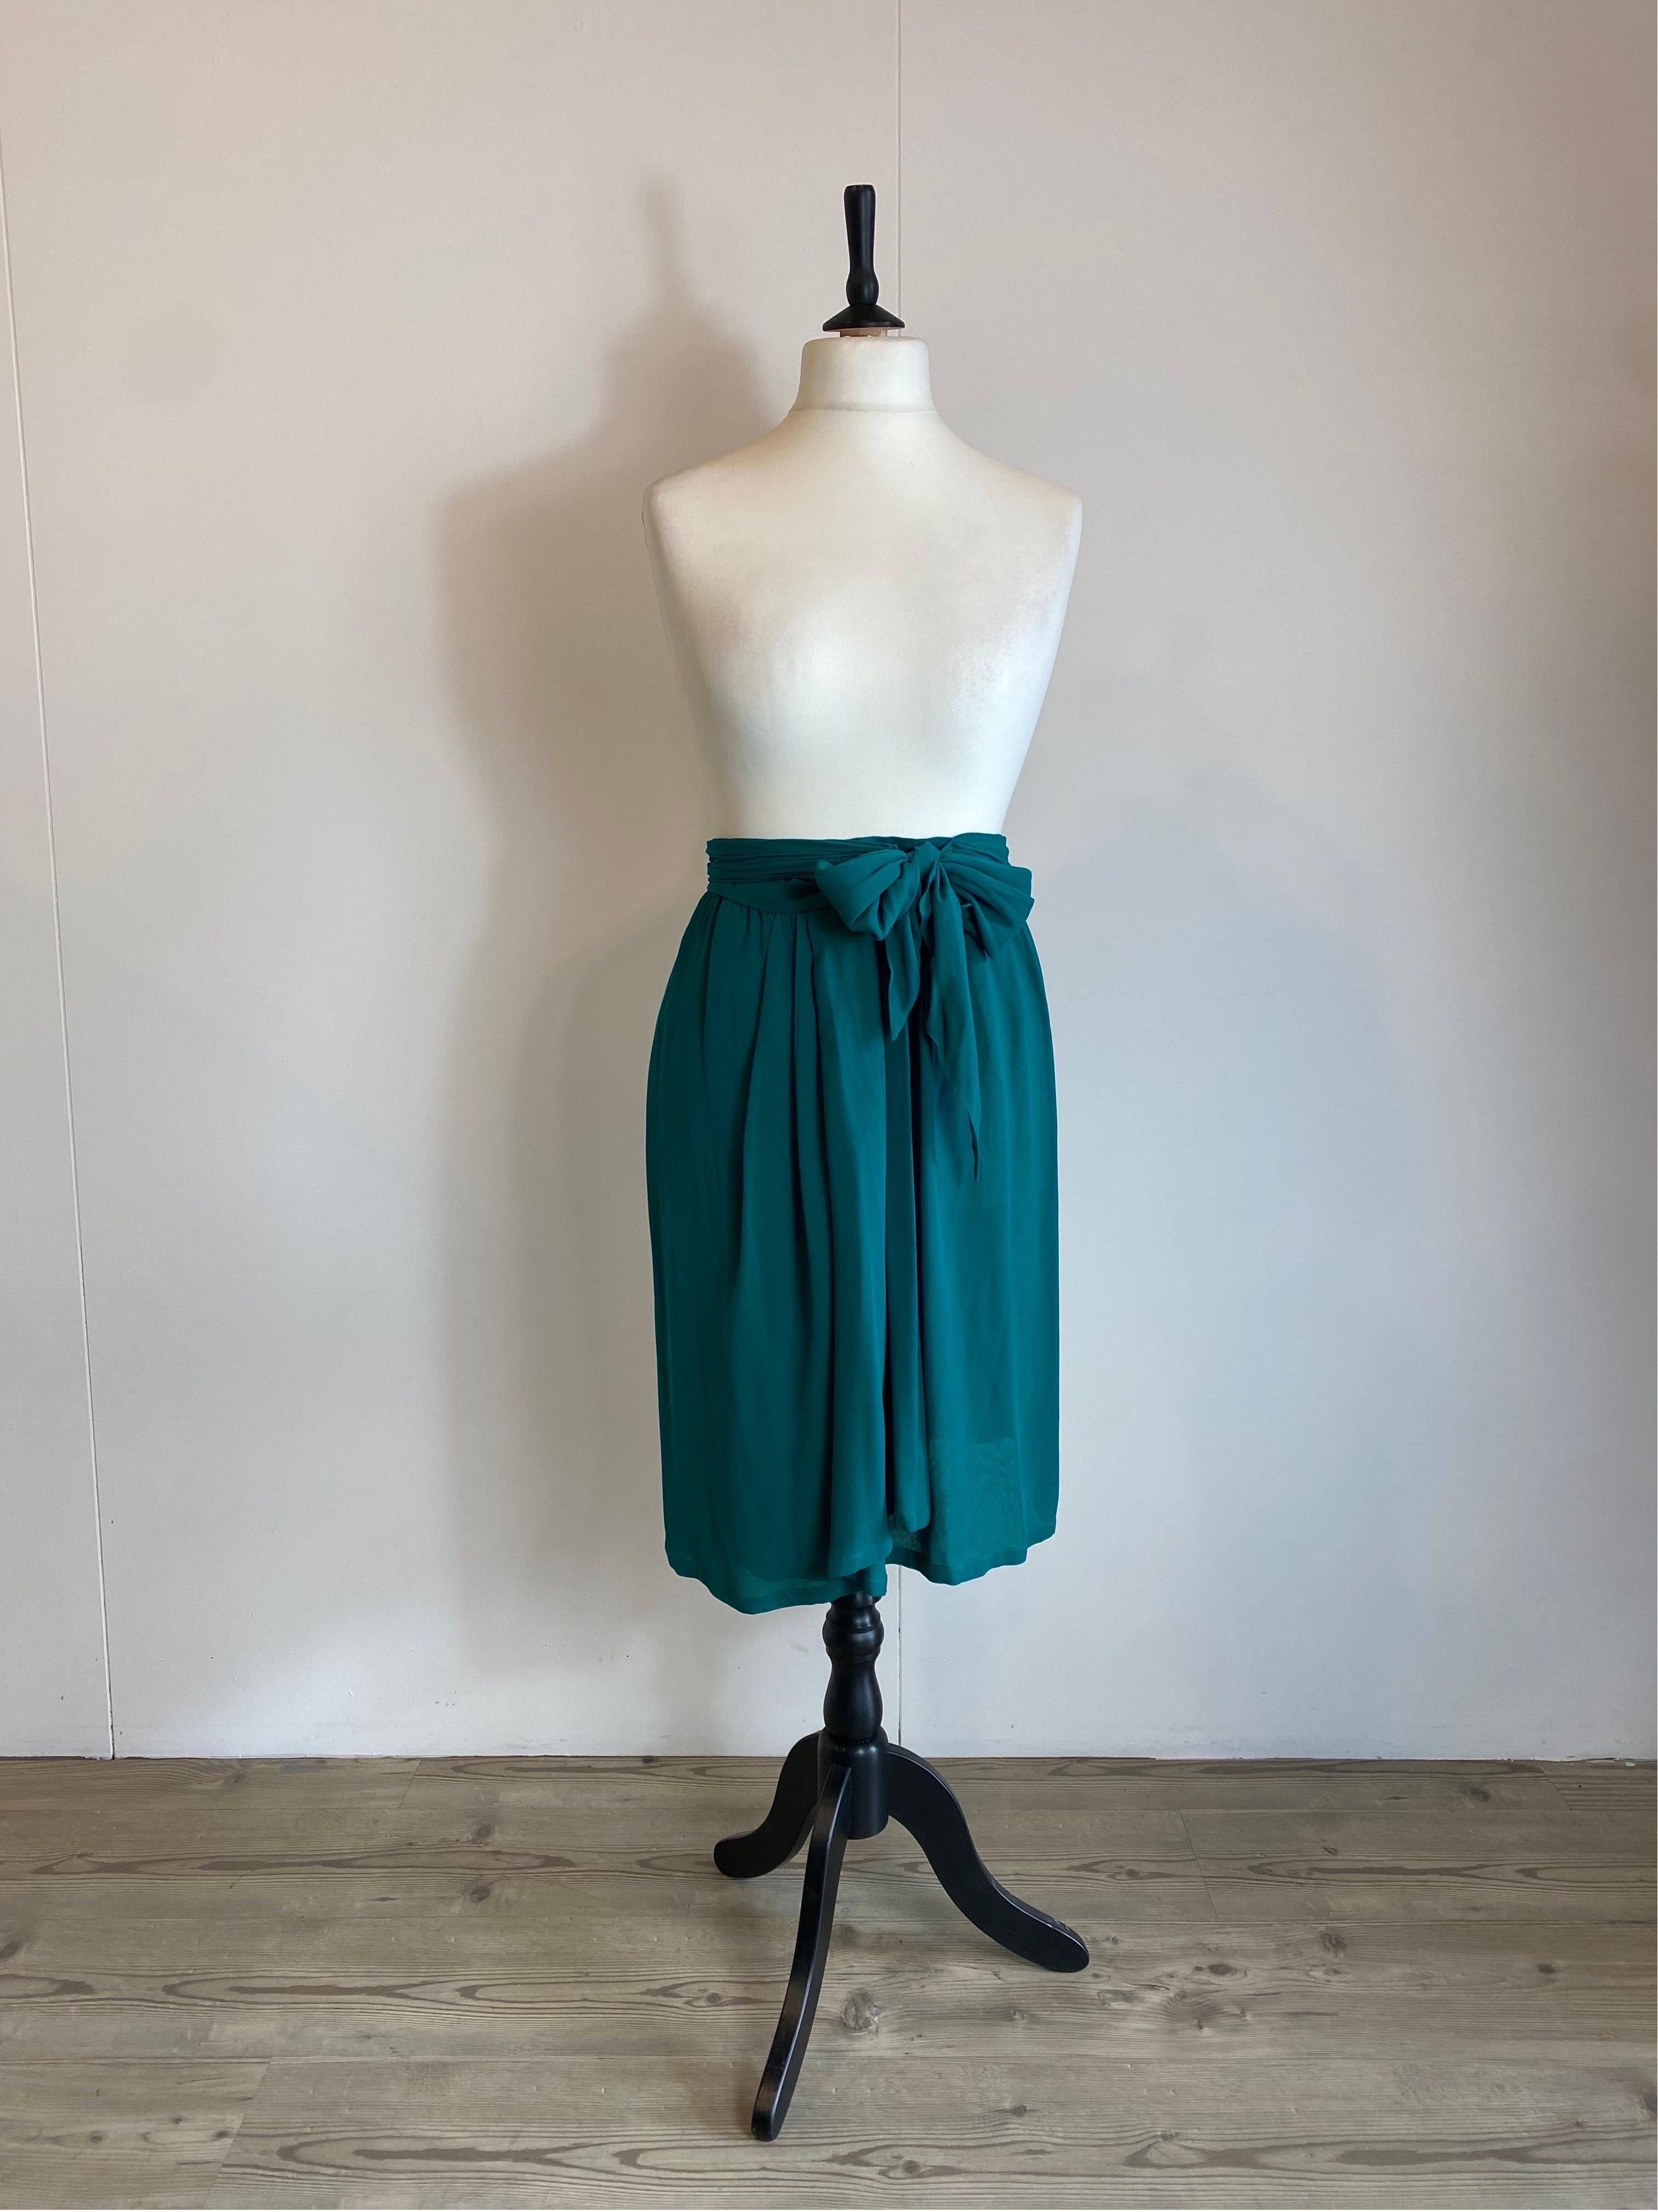 Yves Saint Laurent vintage skirt.
Made of 100% silk. Emerald green colour.
Wallet closure.
Size 40 French which corresponds to 44 Italian
Waist 36 cm
Length 60 cm
Excellent general condition, with minimal signs of normal use.